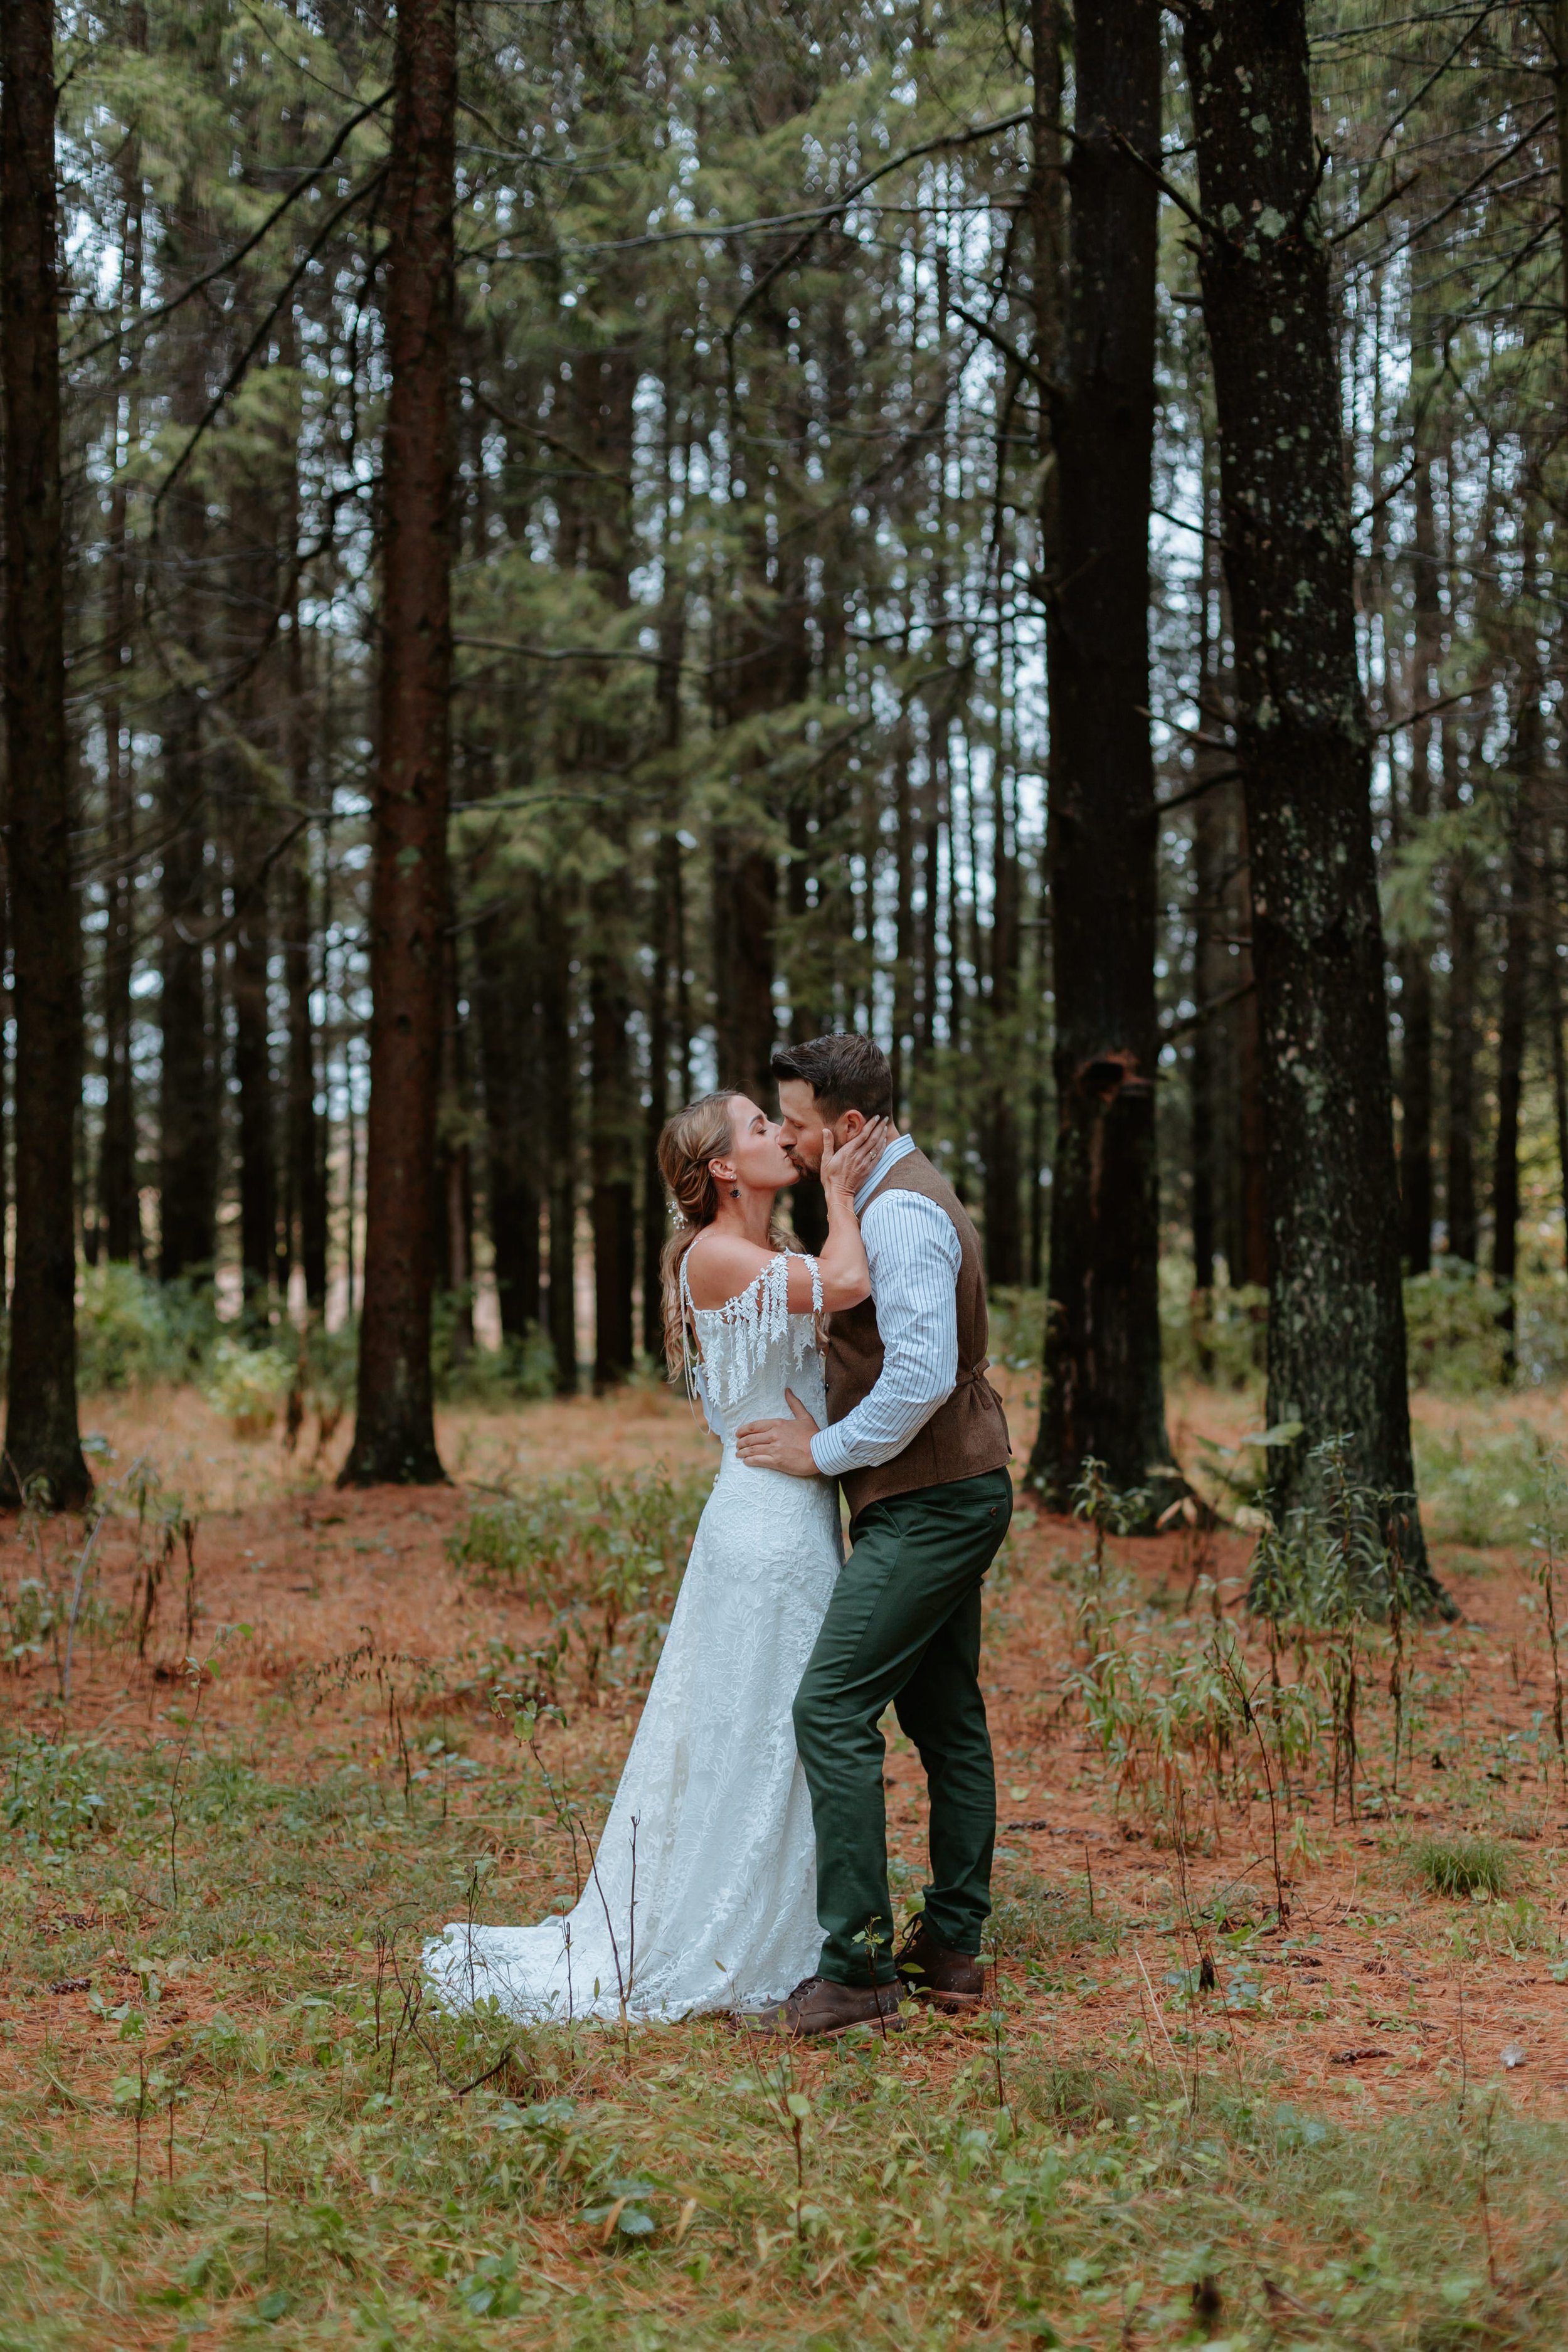 Man and woman kiss in forest of pine trees.